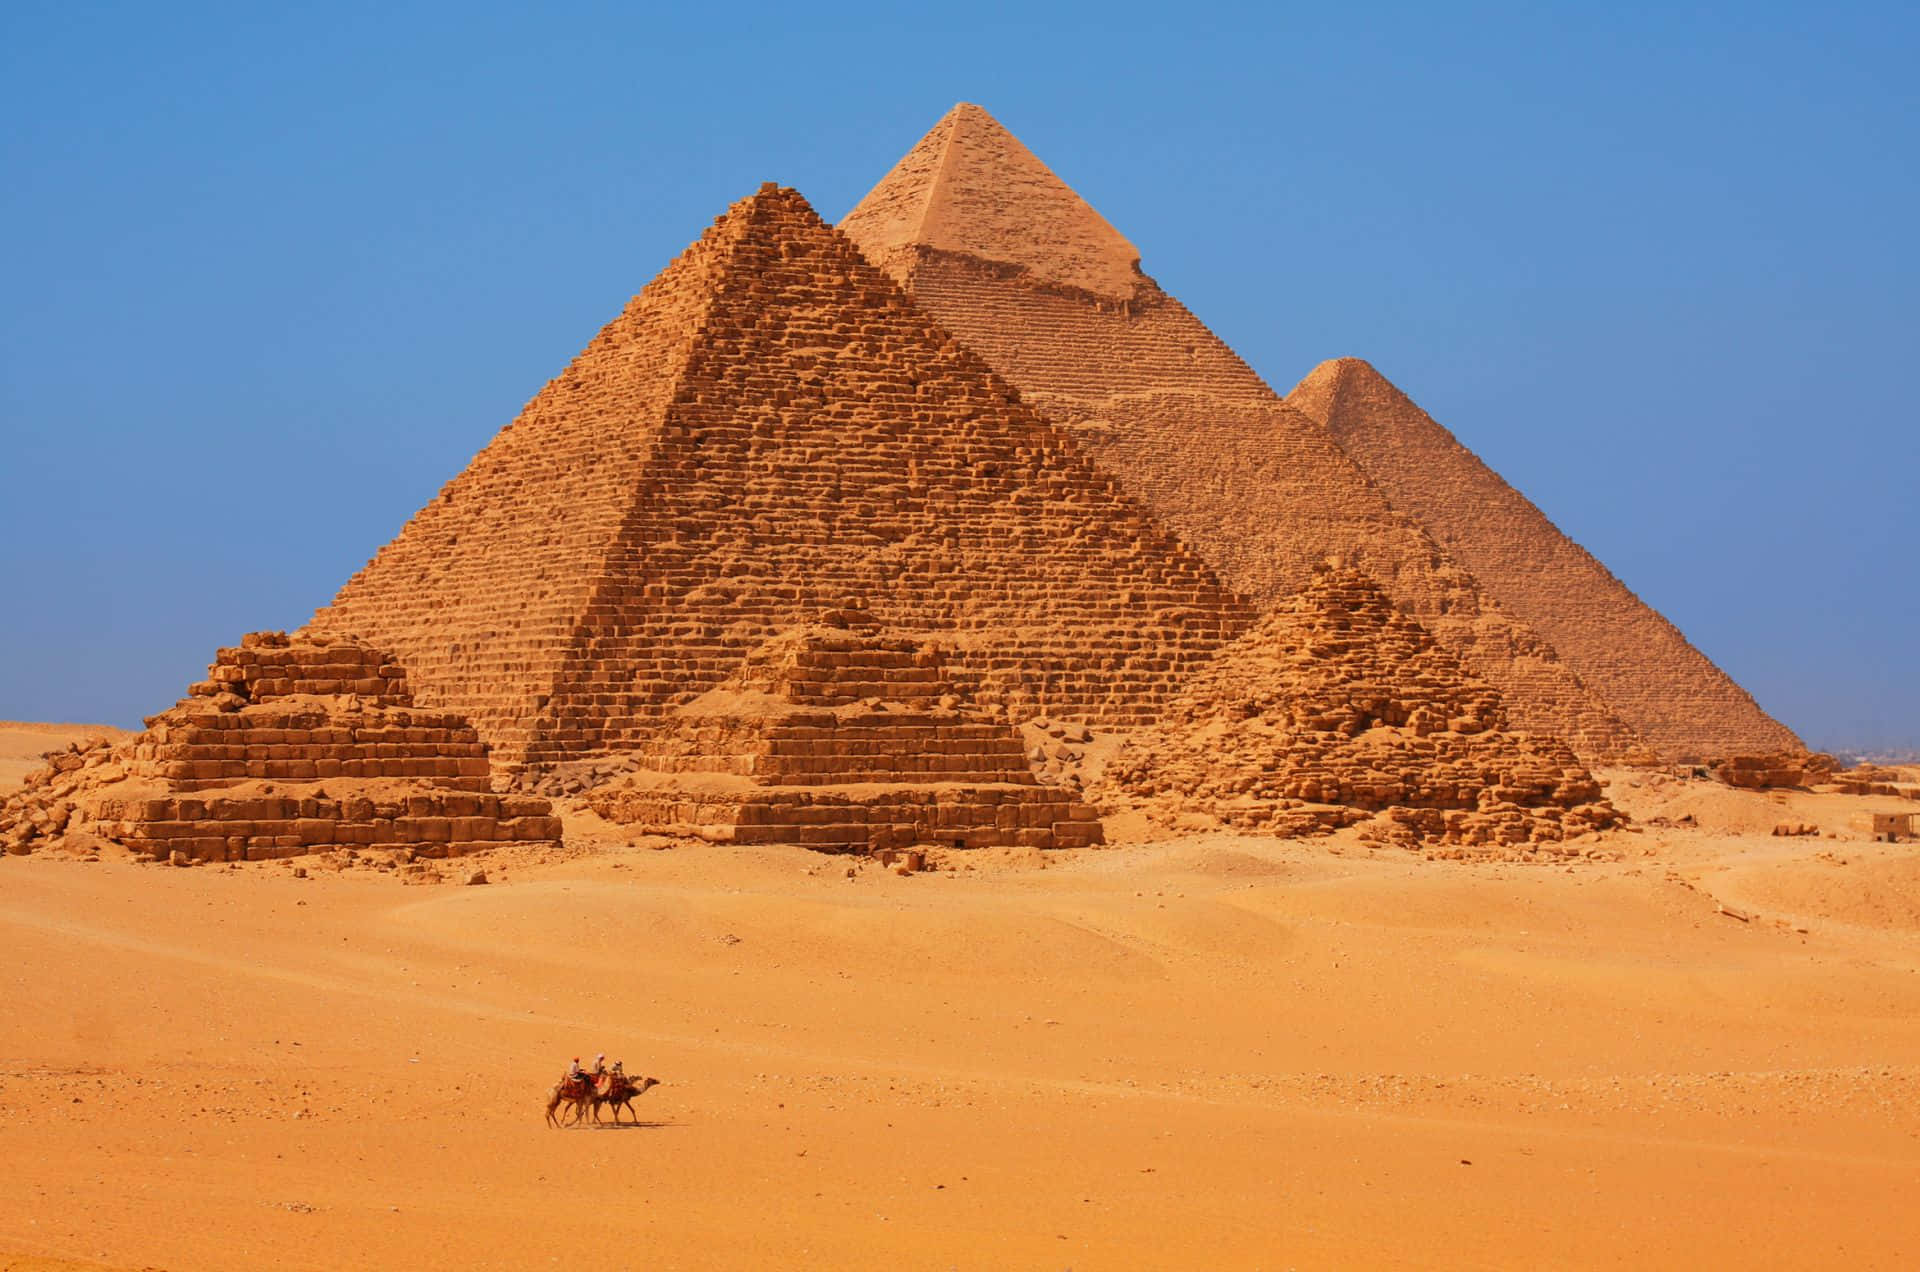 Majestic view of the Pyramids of Giza bathed in a rust-colored hue. Wallpaper